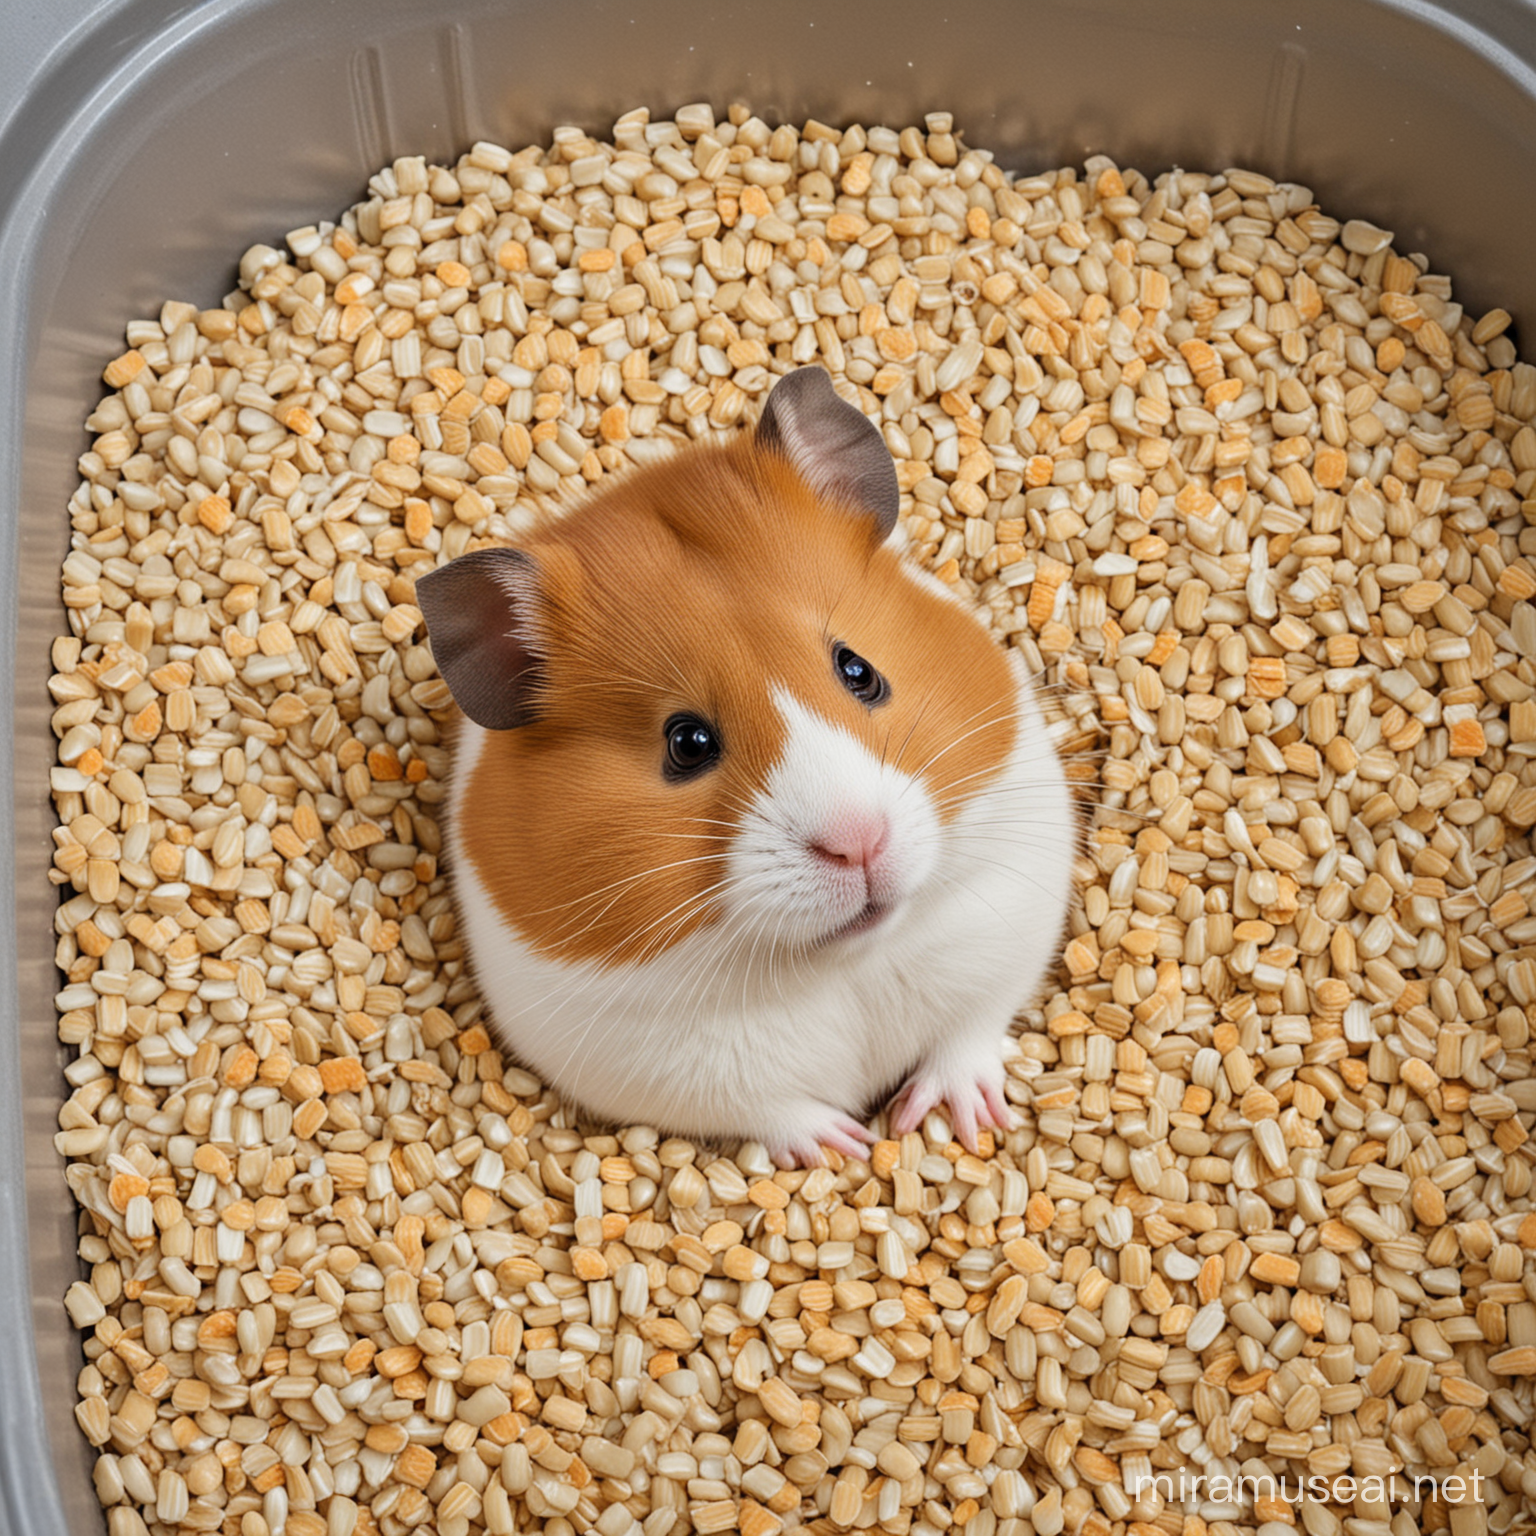 Grieving Daughter Honors Beloved Hamster Ginger in Food Recycling Ritual